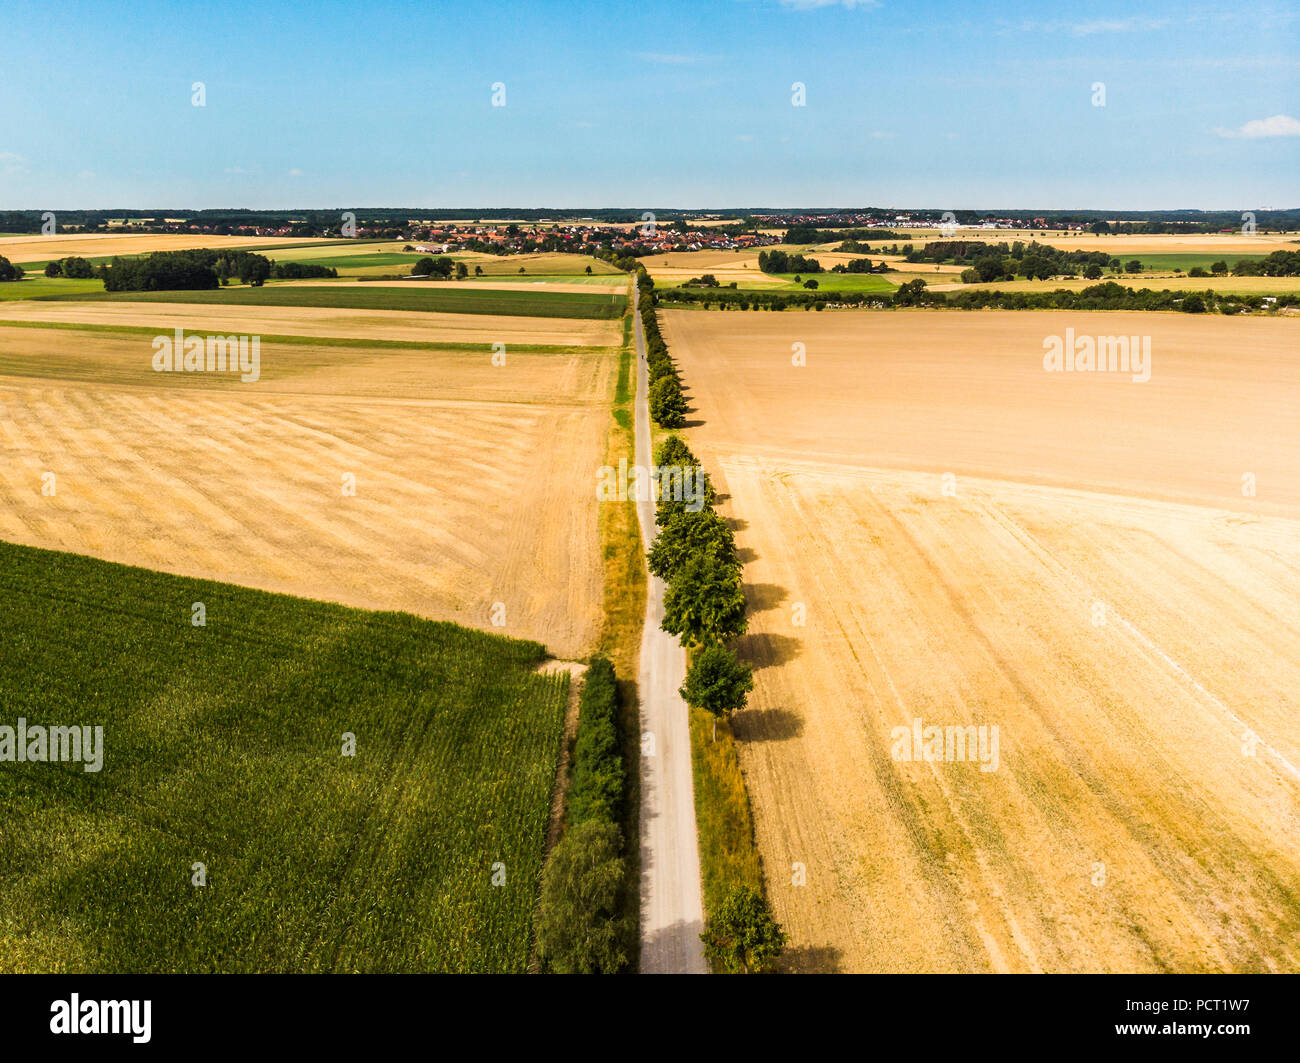 Aerial view from a straight dirt road, which is designed as an avenue with a row of trees, to a village on the horizon. Stock Photo